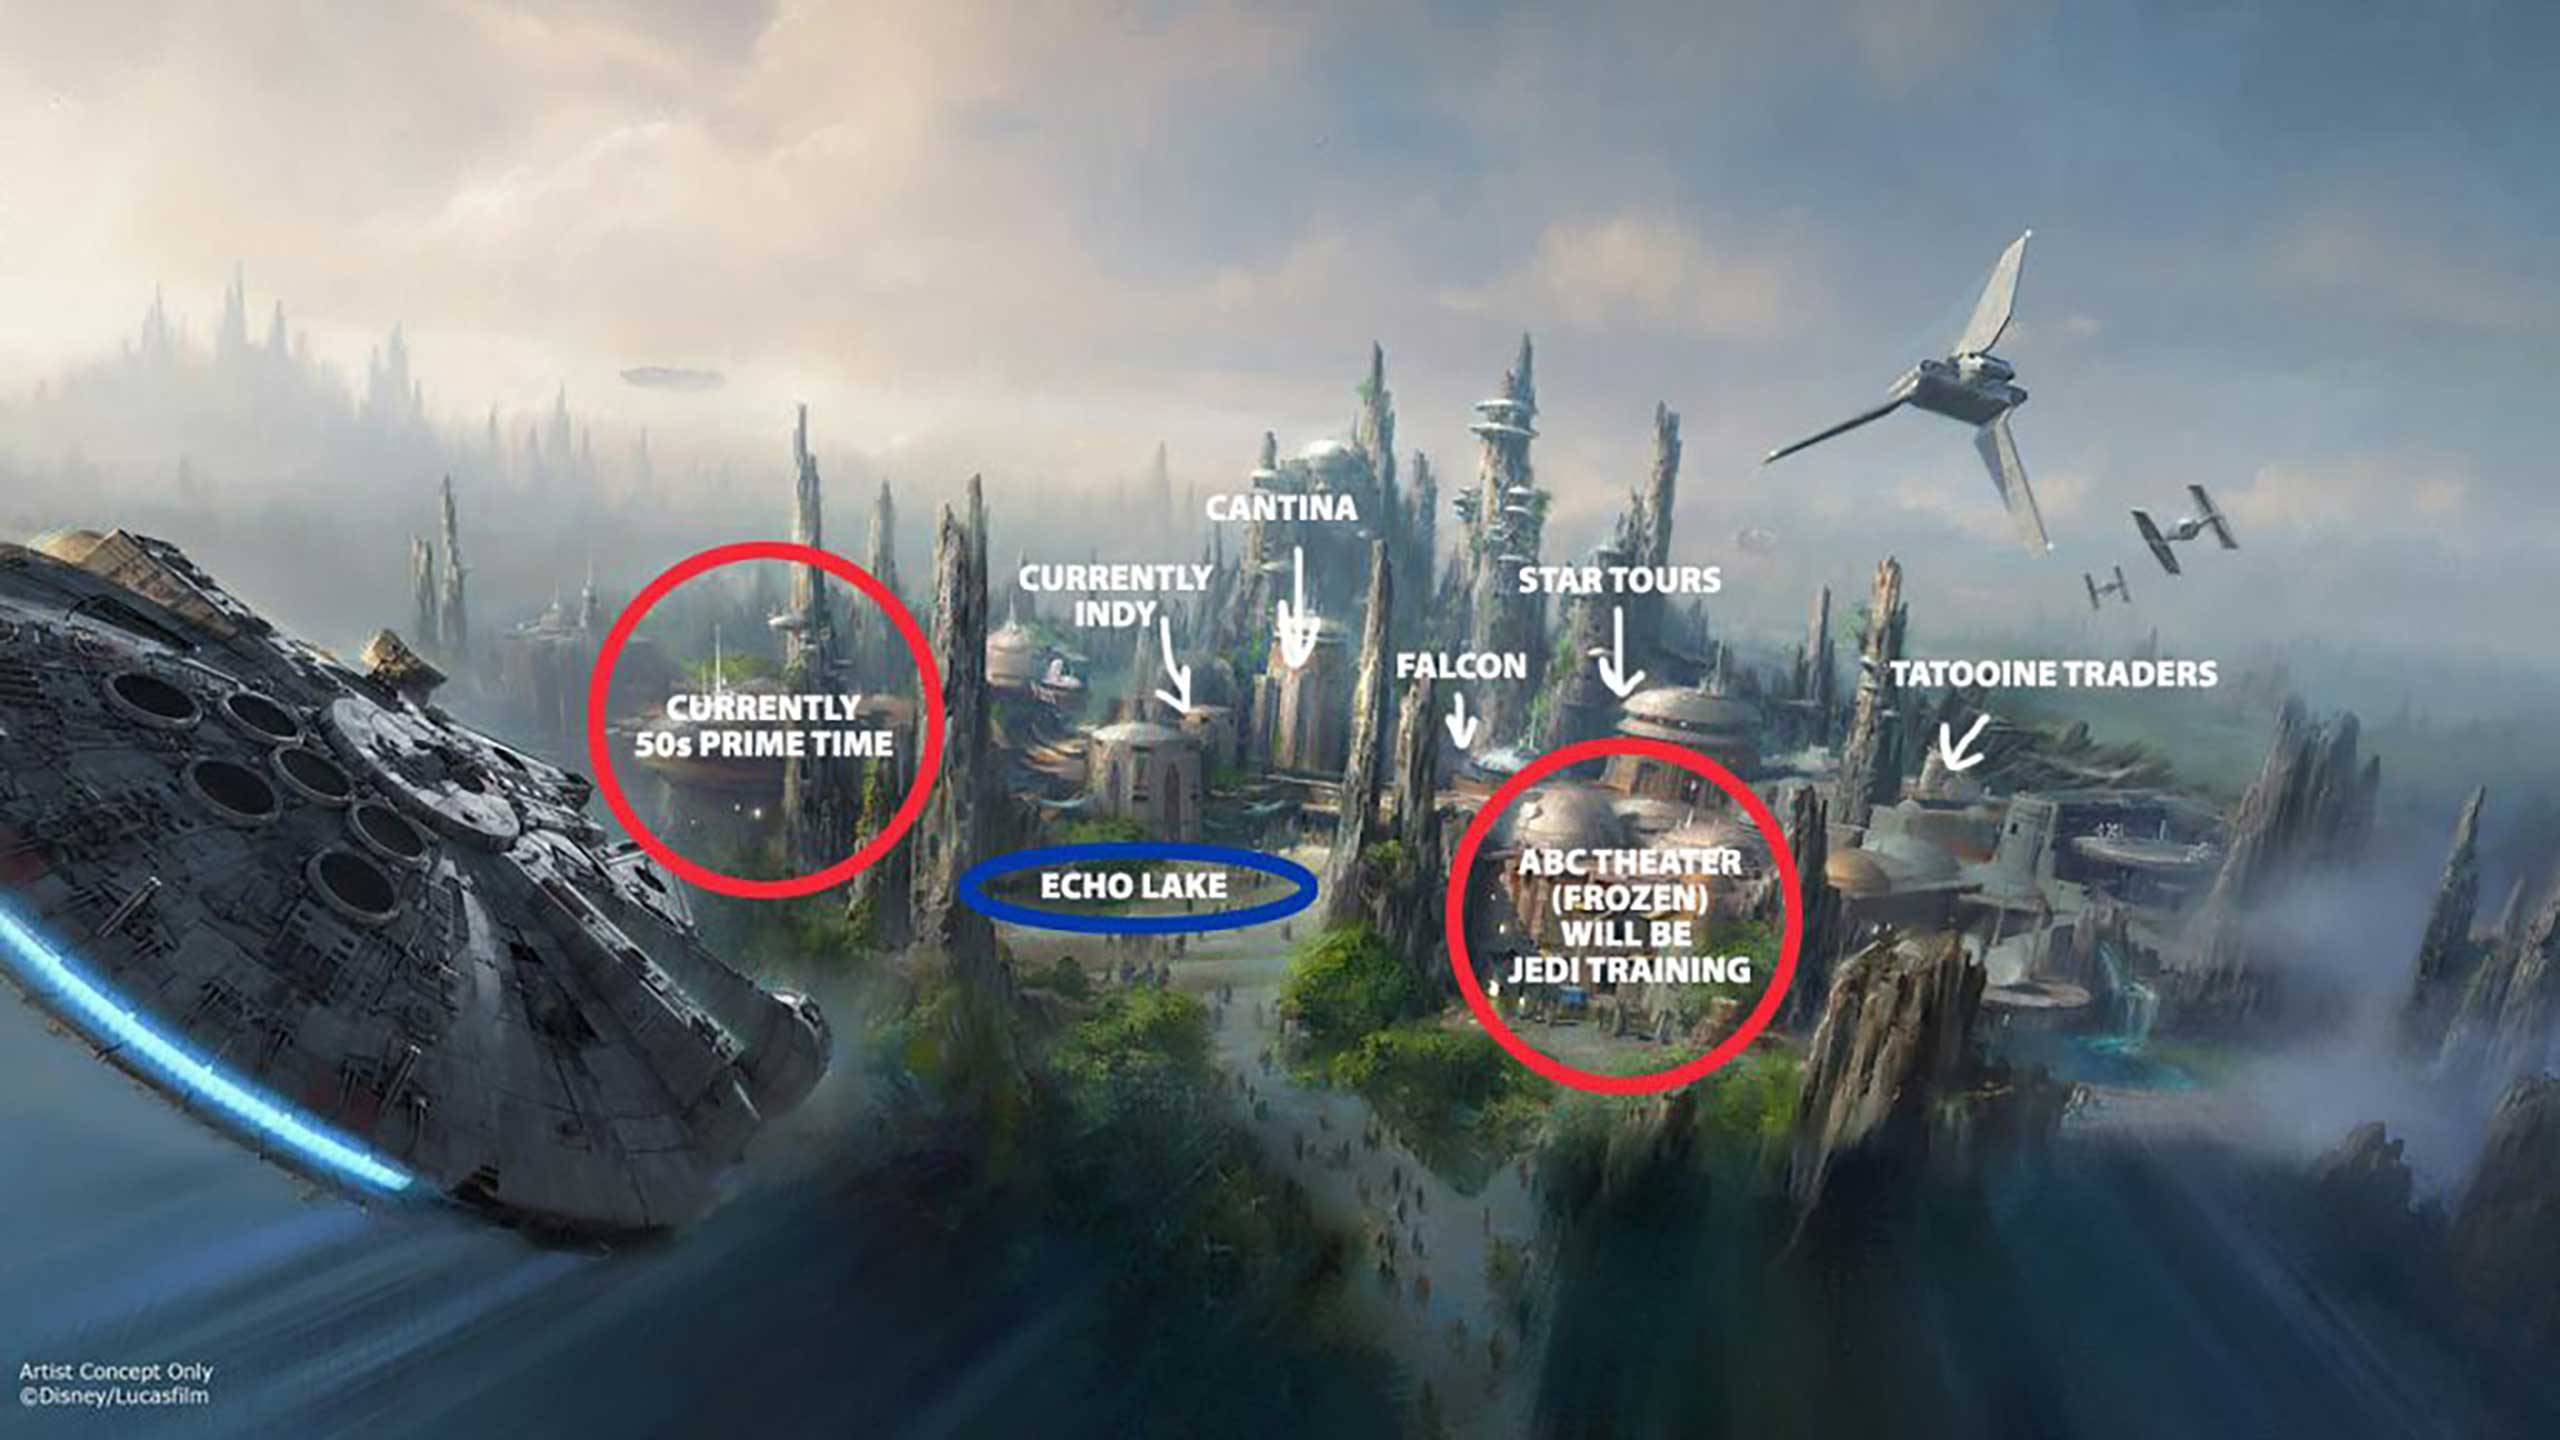 Star Wars Land and Toy Story Land possible locations